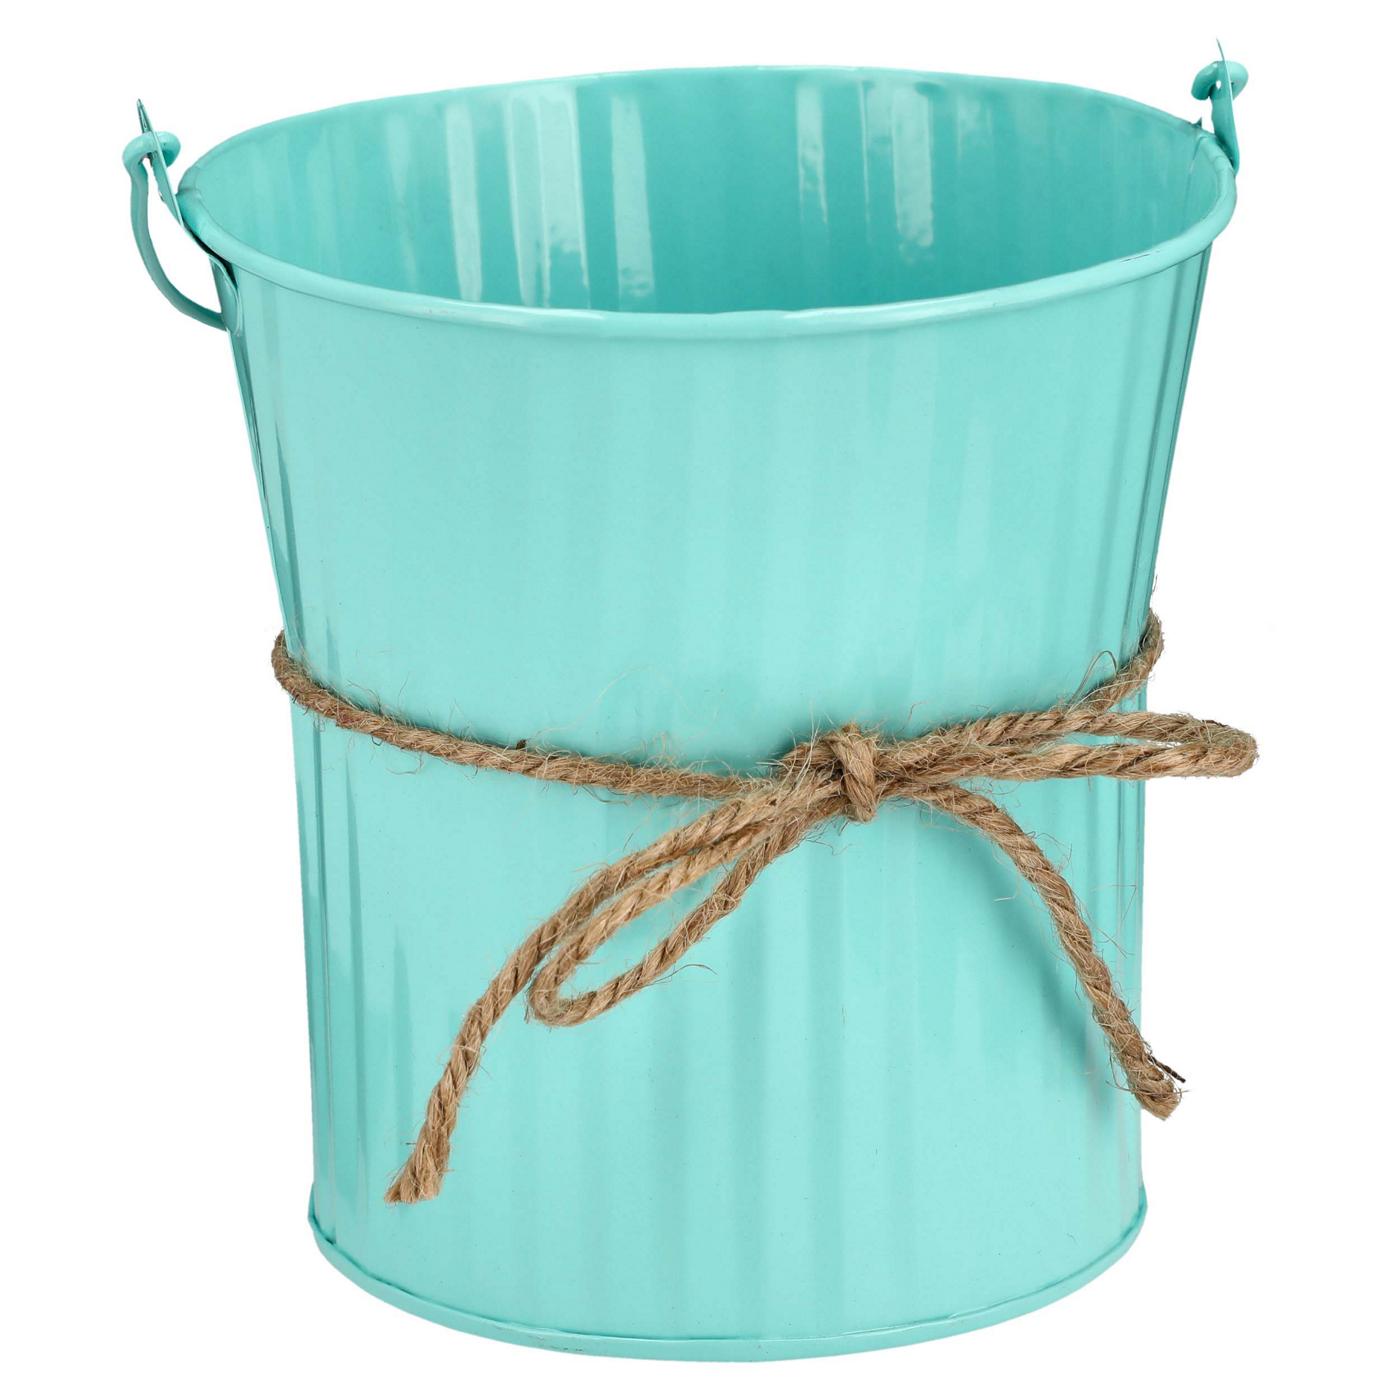 Destination Holiday Aqua Metal Tapered Easter Bucket; image 2 of 2